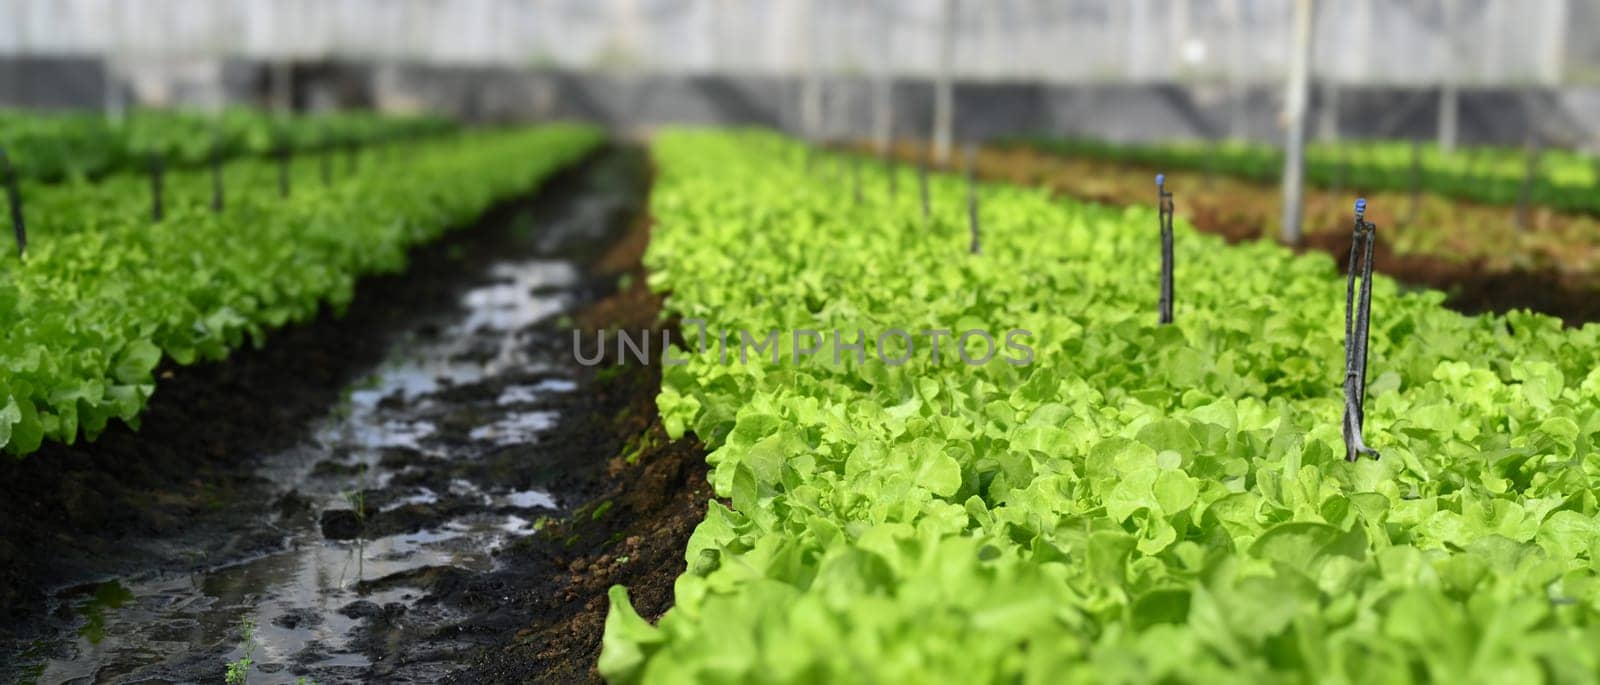 Fresh lettuce growing in organic greenhouse. Harvesting, agricultural and farming concept. by prathanchorruangsak